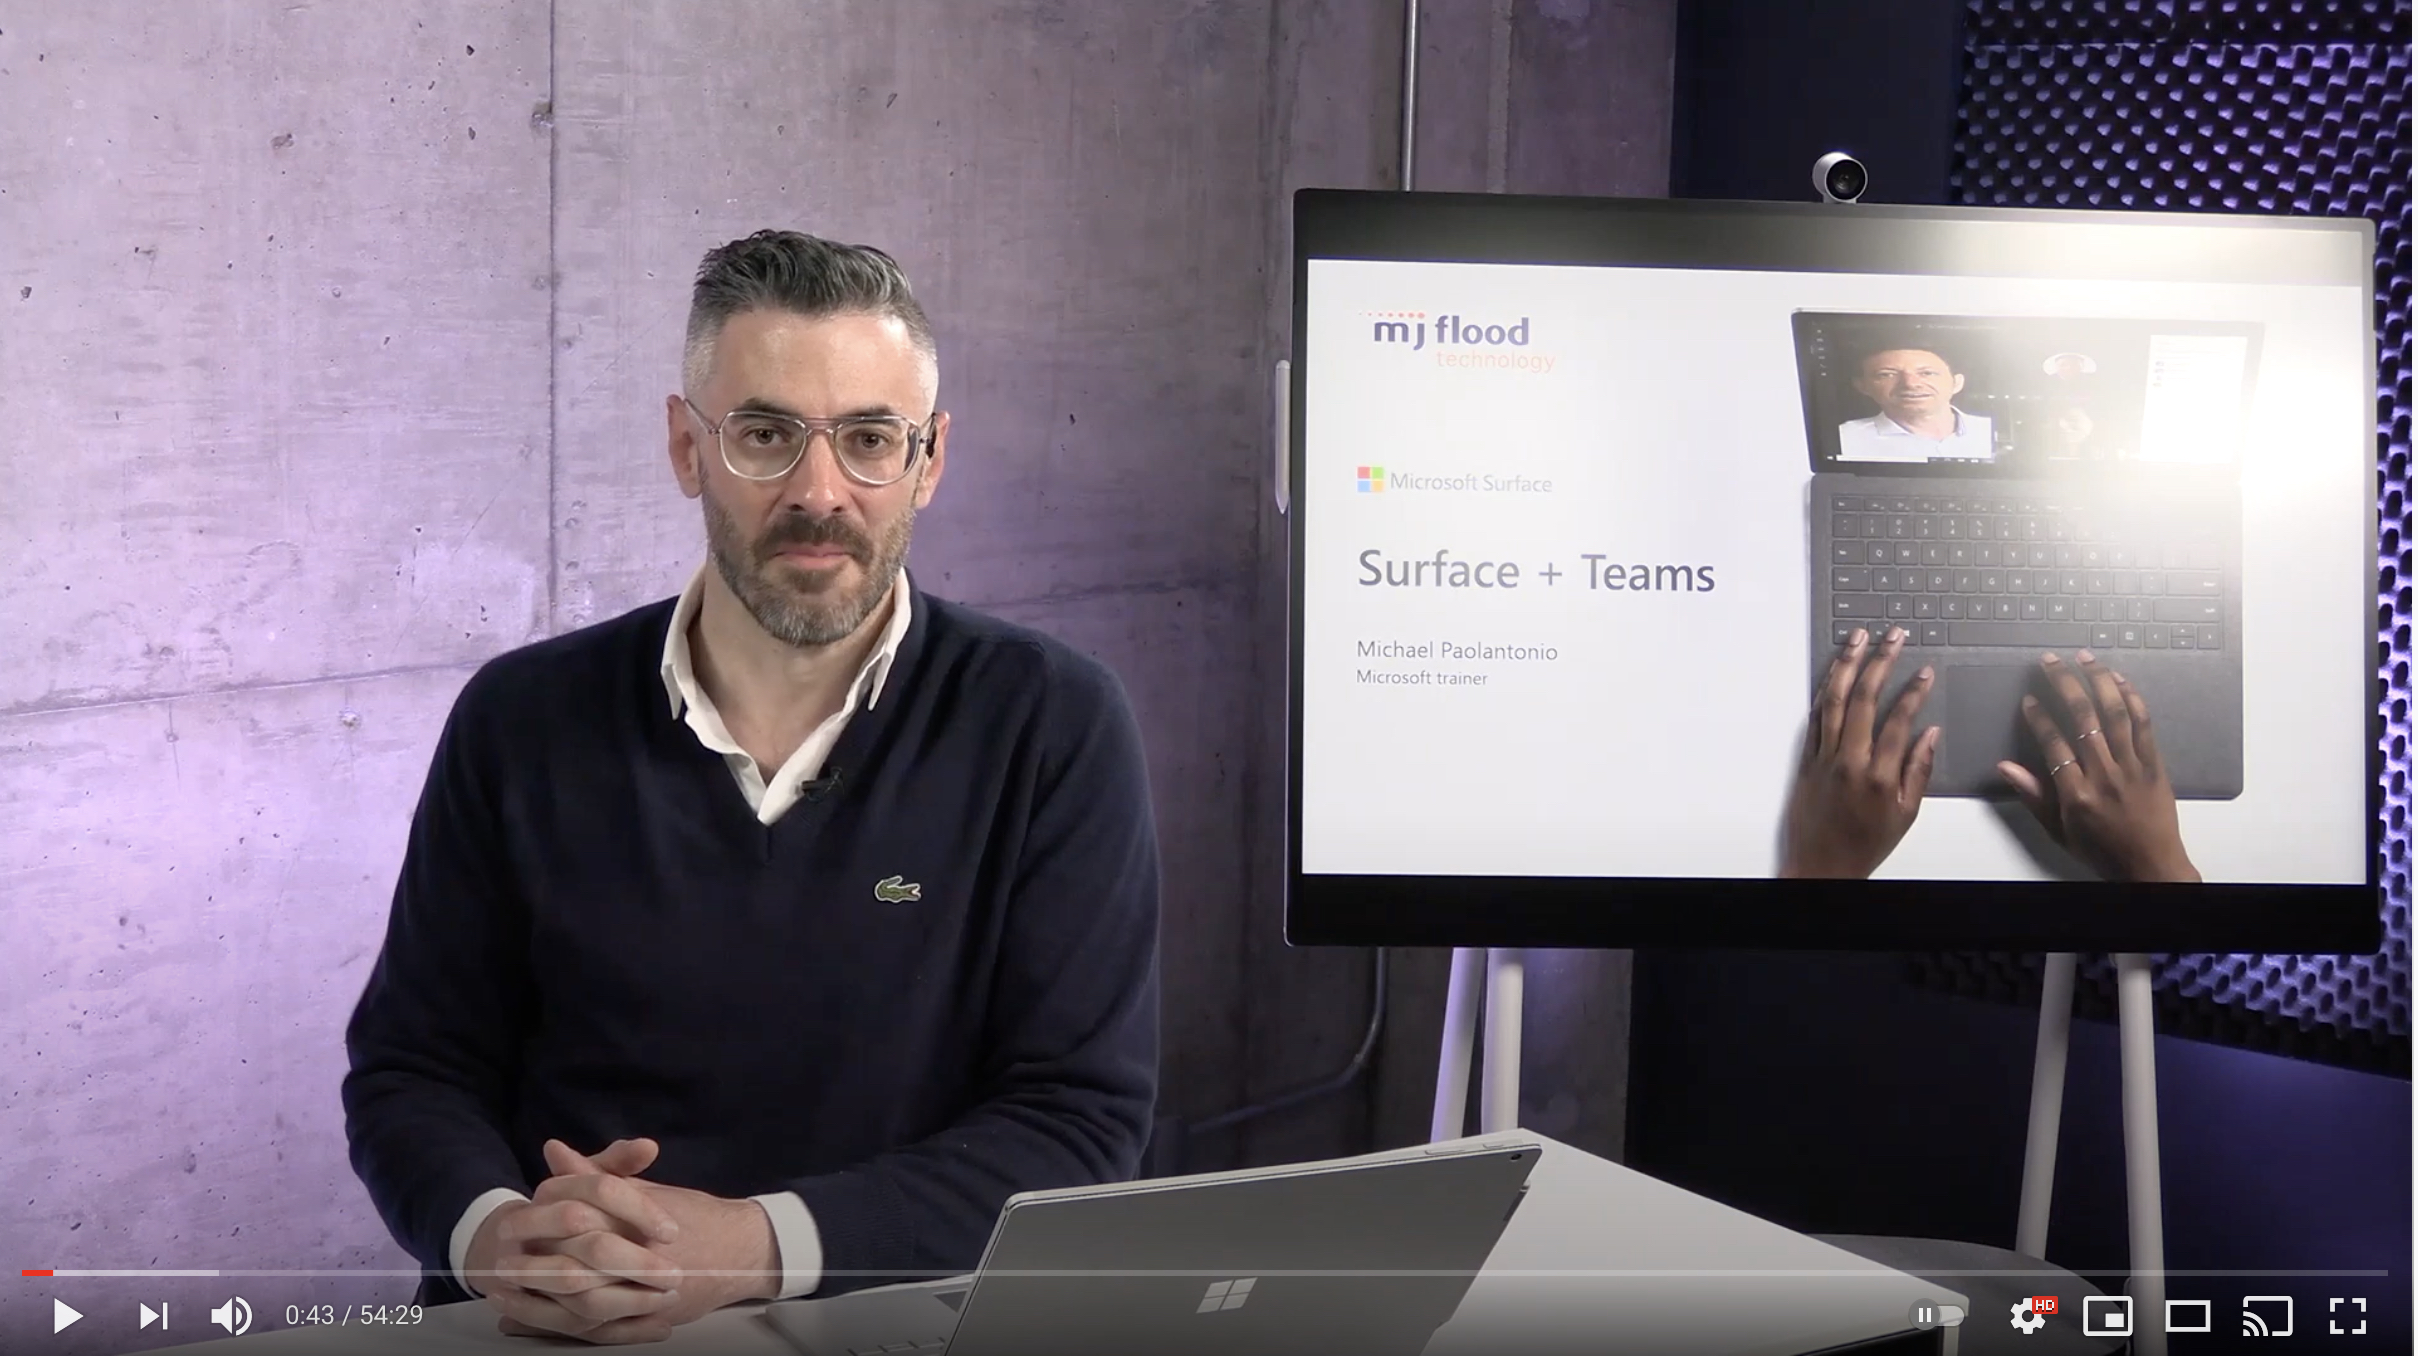 Live Event Recording: Expert Tour of Microsoft Teams & Surface